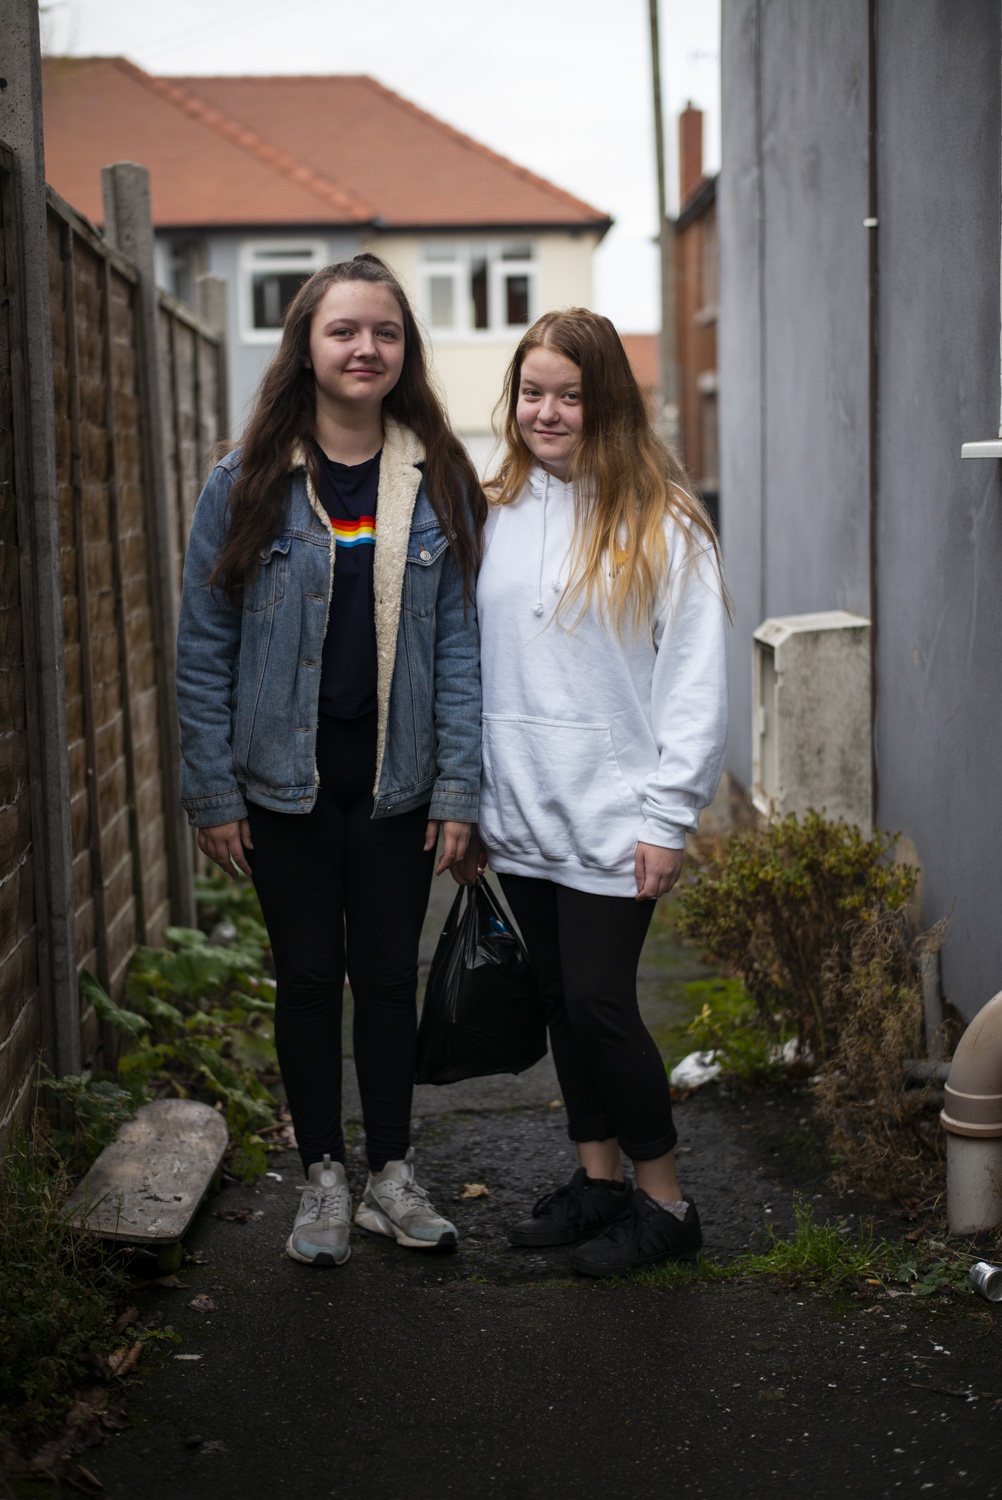   Kayleigh and Millie (Rose’s daughter) outside the flat.      “They tell you this is going to happen, then a week later they change it and tell you something else is happening. They've just given me council tax benefits. It's taken two and a half ye